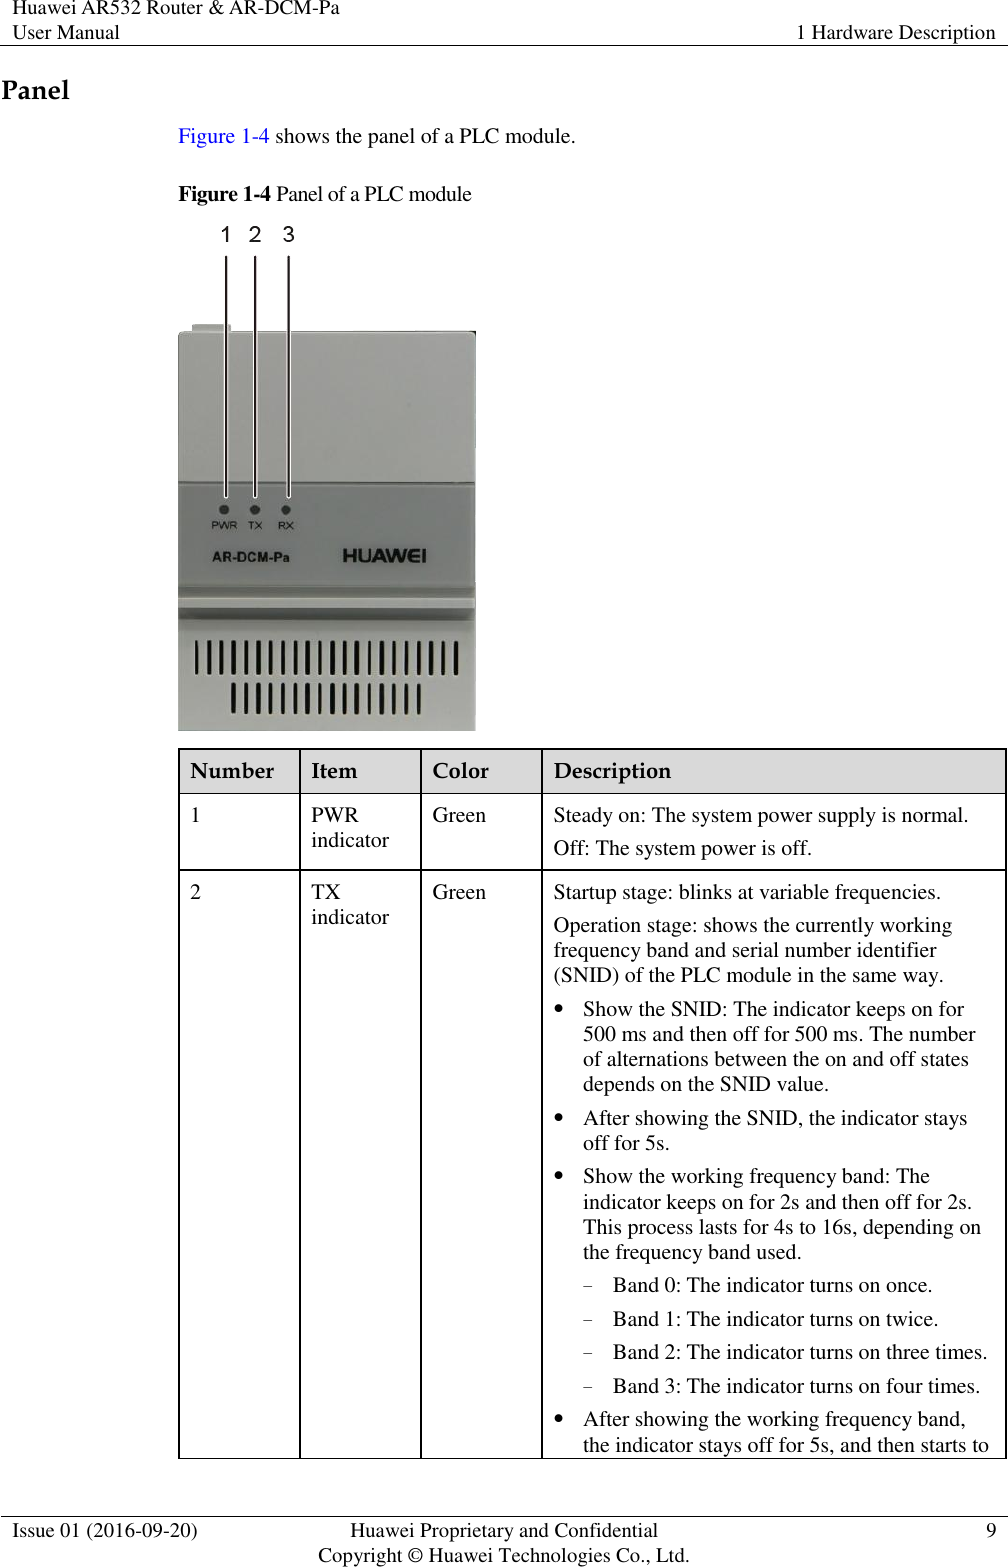 Huawei AR532 Router &amp; AR-DCM-Pa User Manual 1 Hardware Description  Issue 01 (2016-09-20) Huawei Proprietary and Confidential                                     Copyright © Huawei Technologies Co., Ltd. 9  Panel Figure 1-4 shows the panel of a PLC module. Figure 1-4 Panel of a PLC module  Number Item Color Description 1 PWR indicator Green Steady on: The system power supply is normal. Off: The system power is off. 2 TX indicator Green Startup stage: blinks at variable frequencies. Operation stage: shows the currently working frequency band and serial number identifier (SNID) of the PLC module in the same way.  Show the SNID: The indicator keeps on for 500 ms and then off for 500 ms. The number of alternations between the on and off states depends on the SNID value.  After showing the SNID, the indicator stays off for 5s.  Show the working frequency band: The indicator keeps on for 2s and then off for 2s. This process lasts for 4s to 16s, depending on the frequency band used. − Band 0: The indicator turns on once. − Band 1: The indicator turns on twice. − Band 2: The indicator turns on three times. − Band 3: The indicator turns on four times.  After showing the working frequency band, the indicator stays off for 5s, and then starts to 